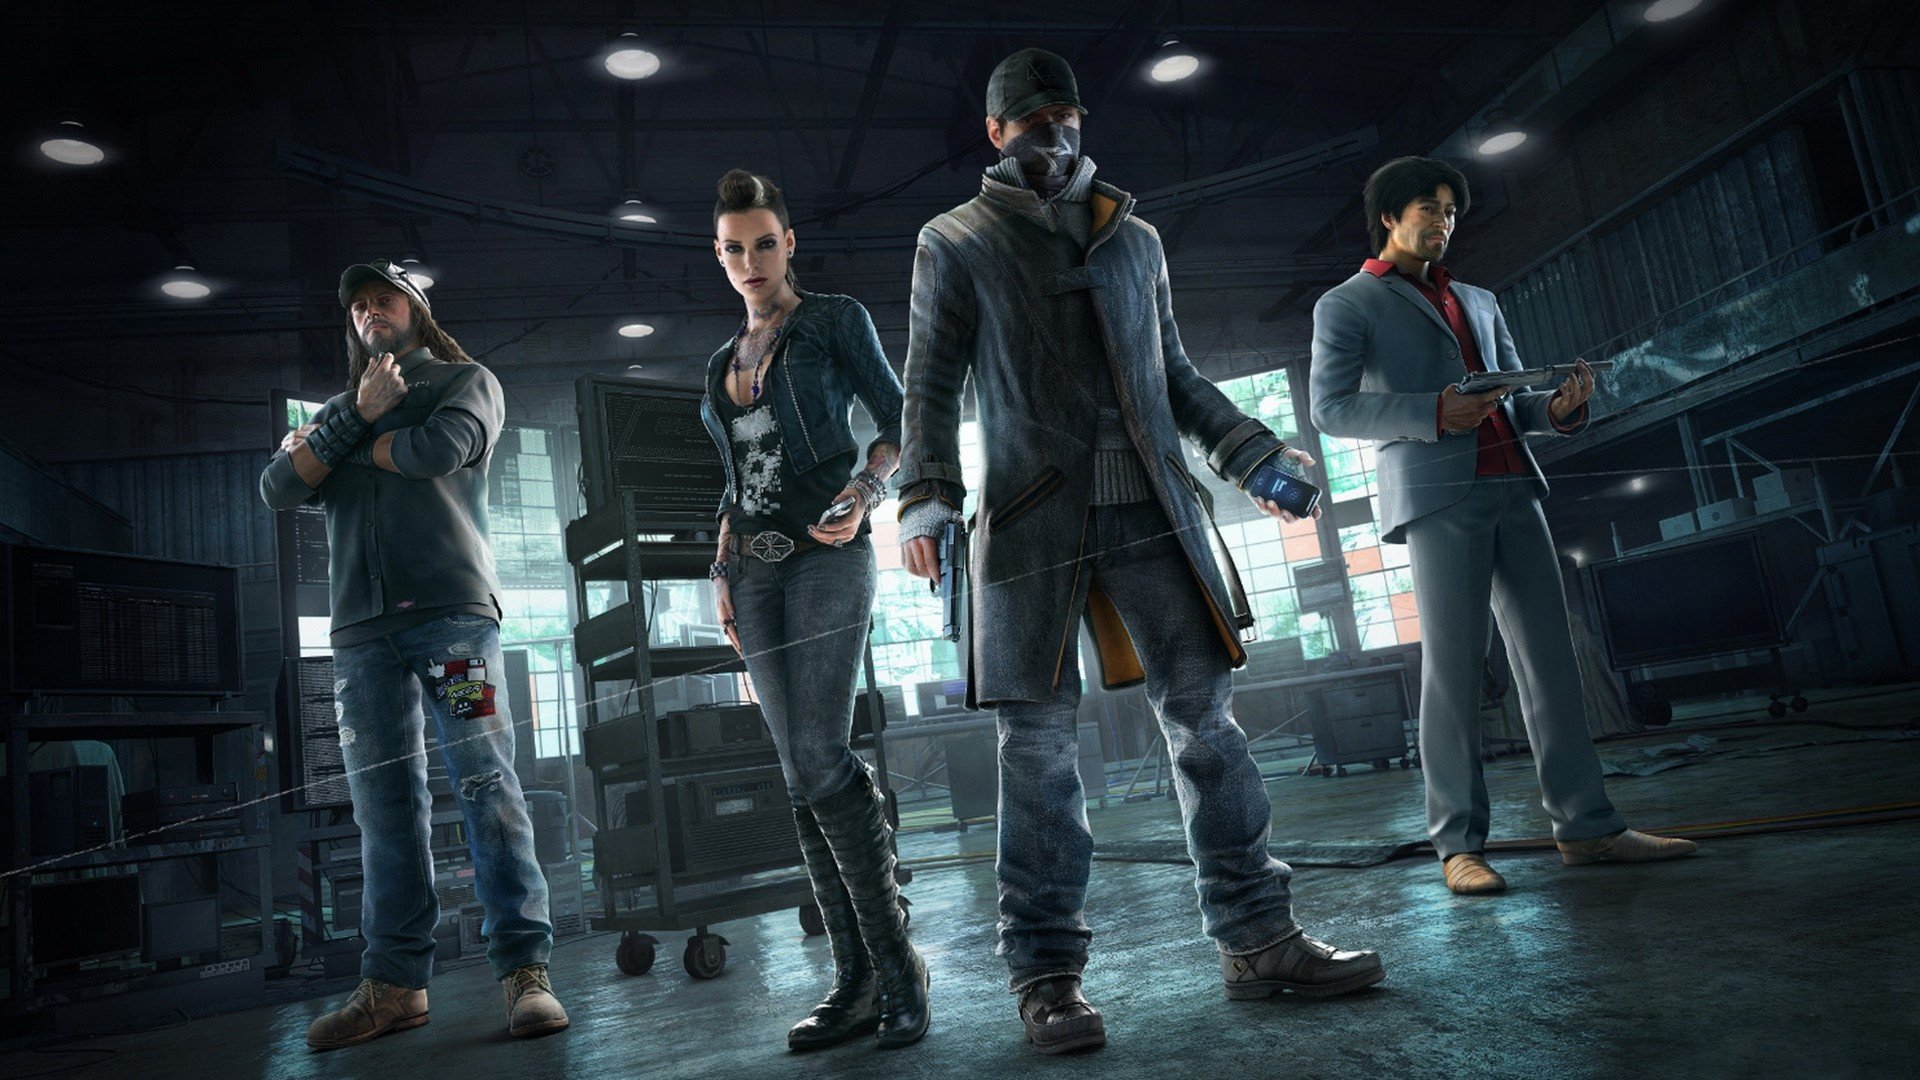 Download hd 1080p Watch Dogs PC background ID:117250 for free